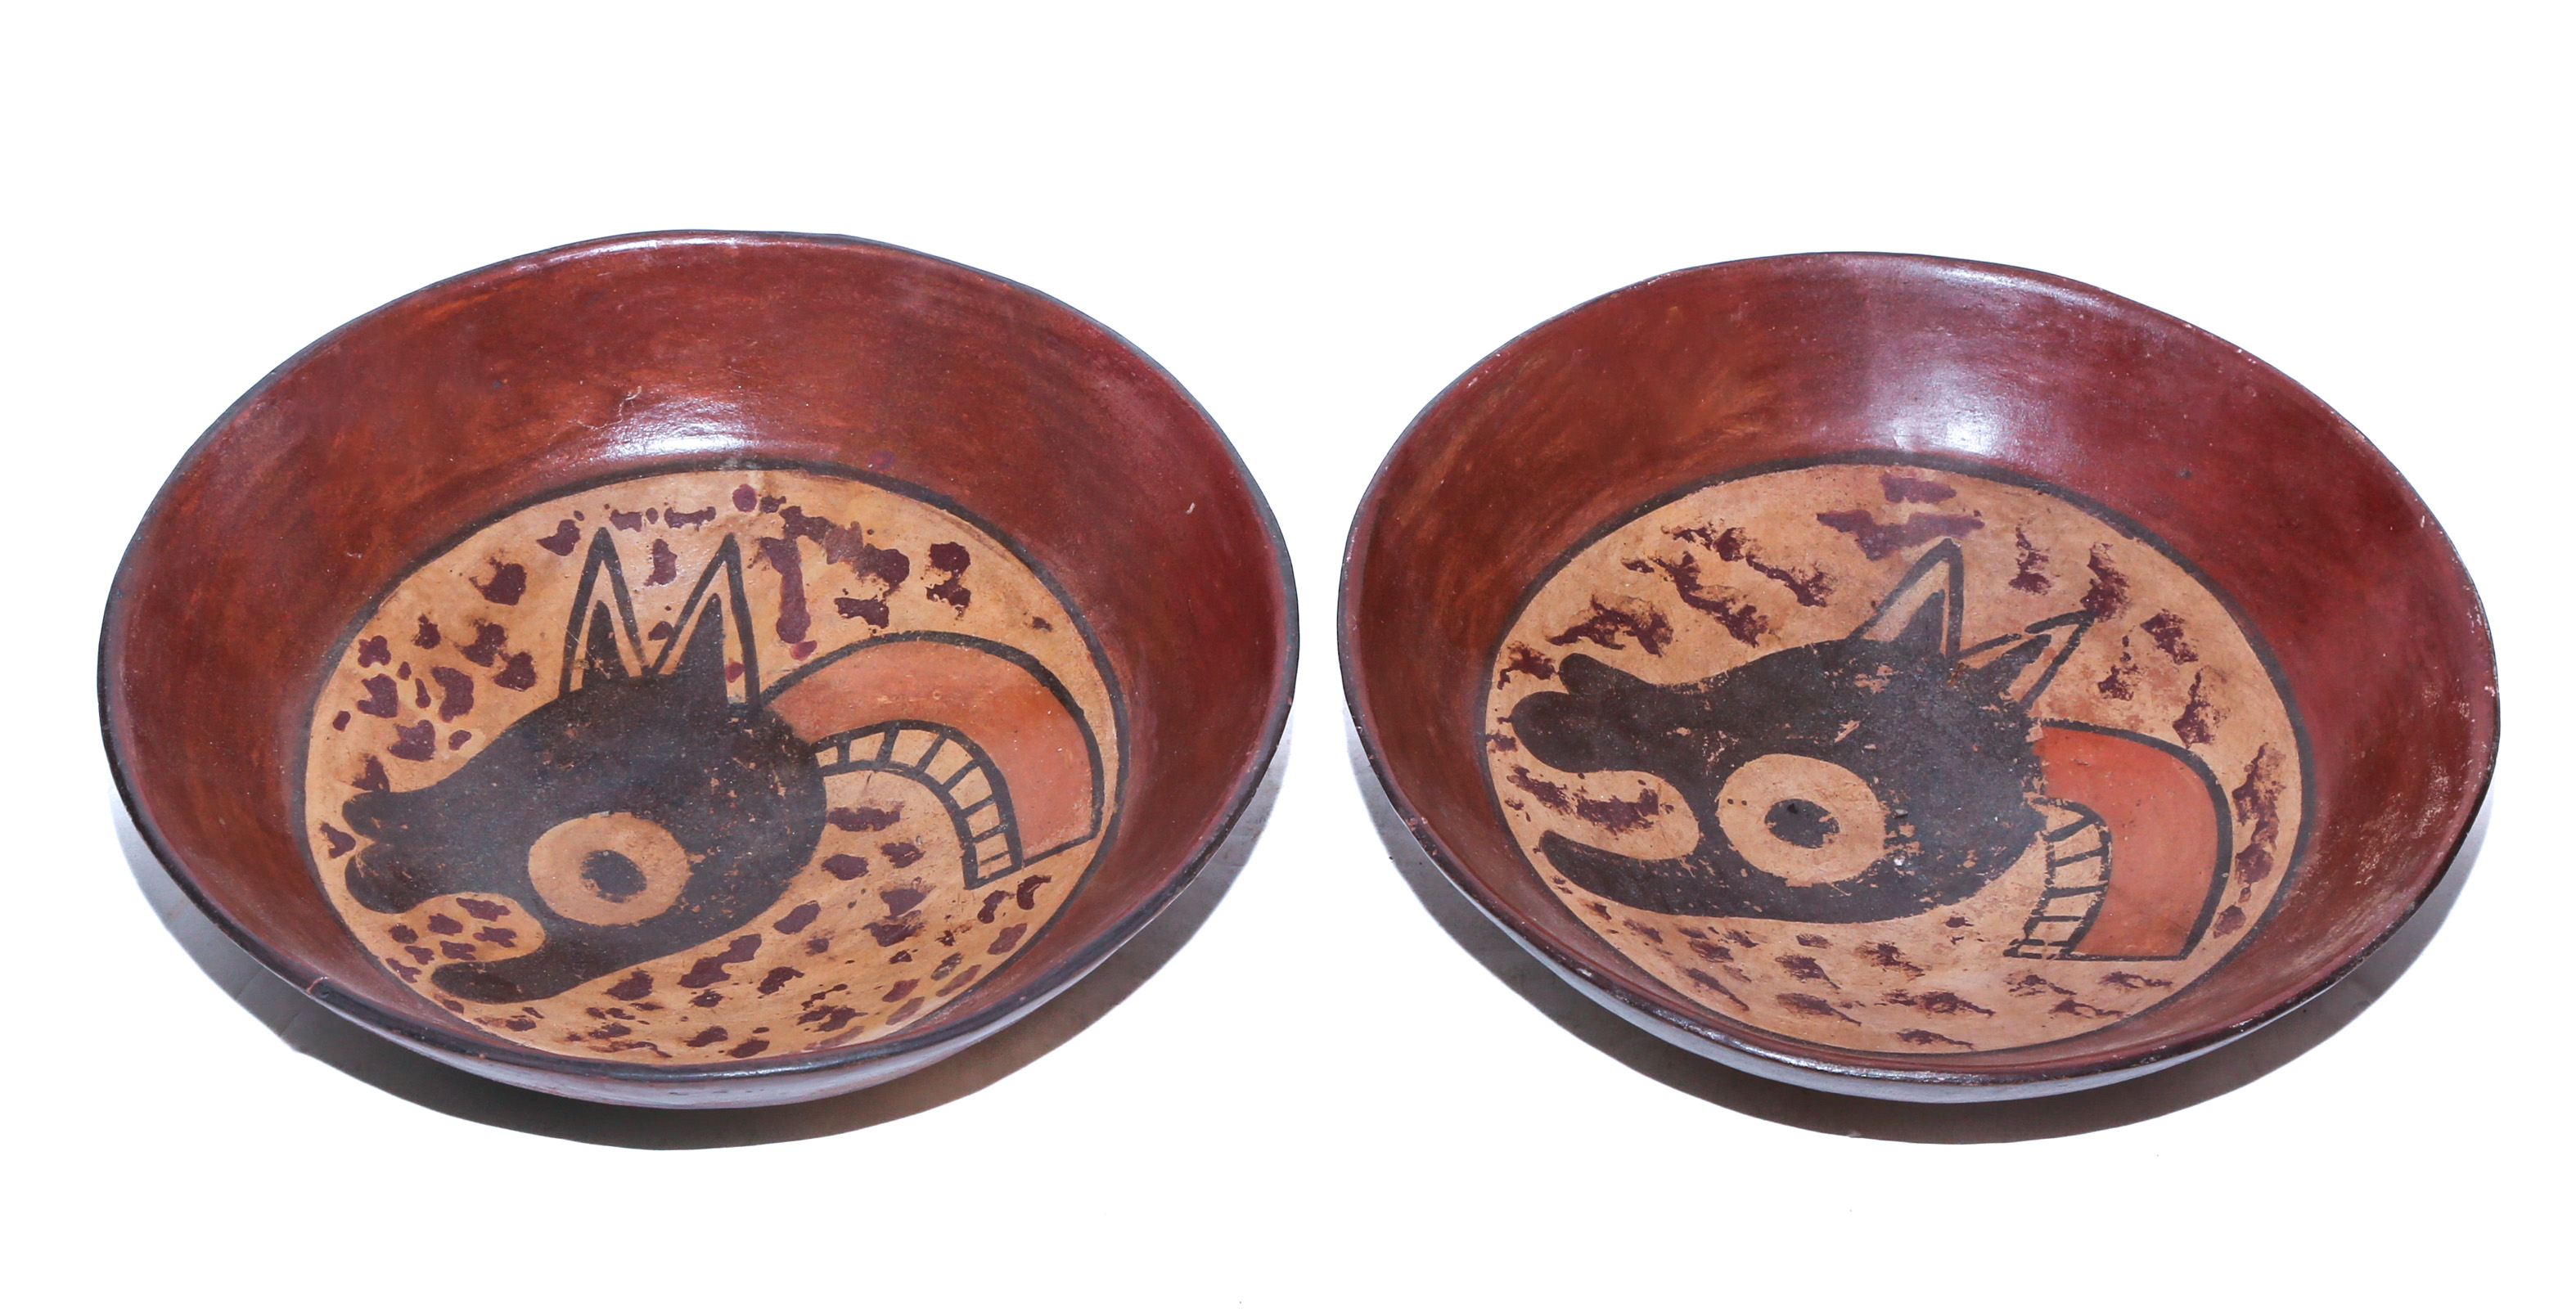 MATCHED PAIR OF NAZCA PAINTED EARTHENWARE